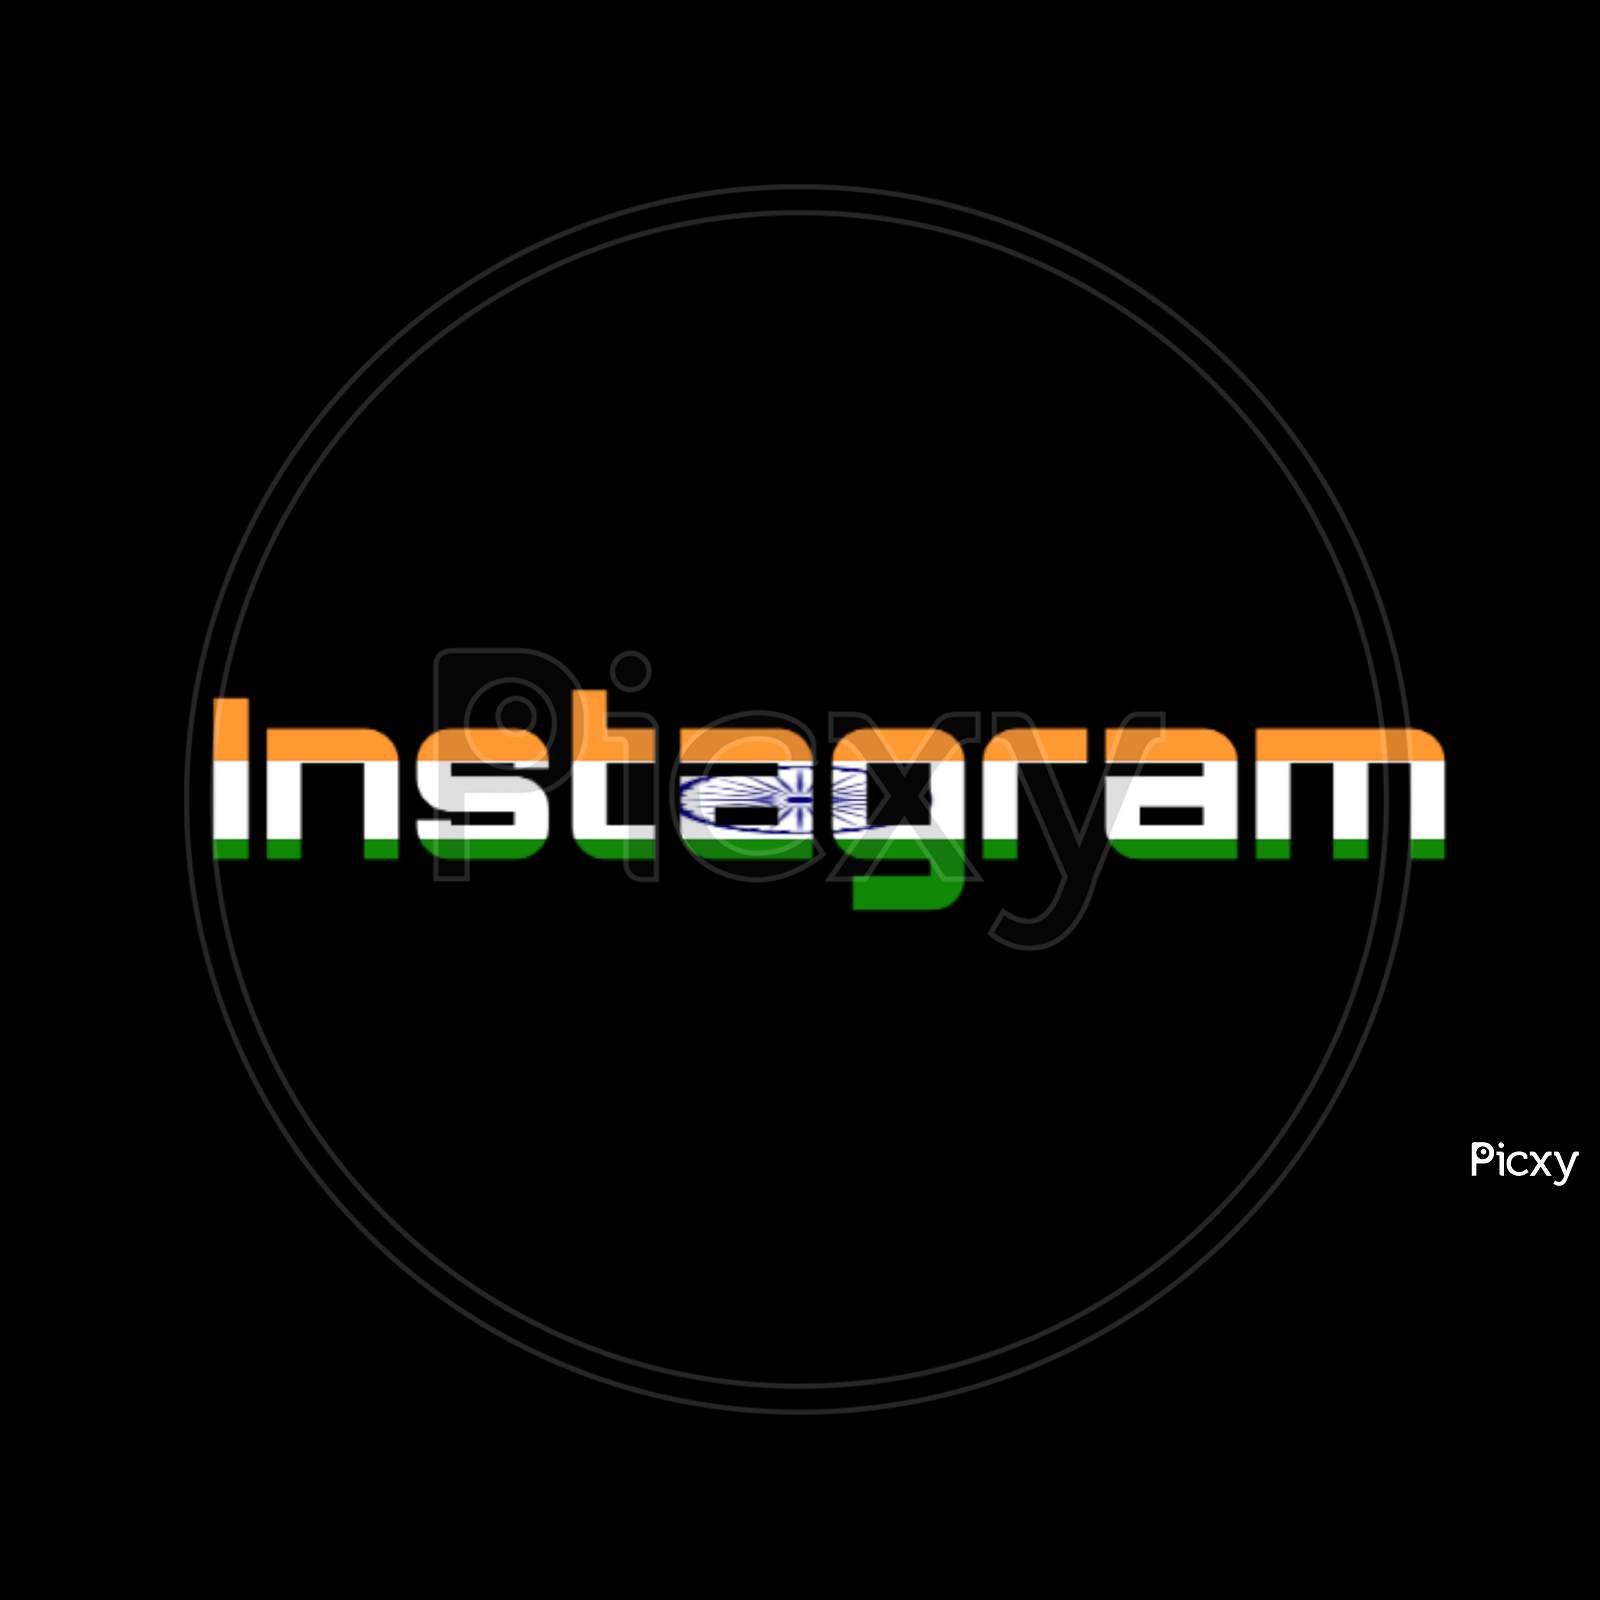 Instagram name logo with indian flag colour